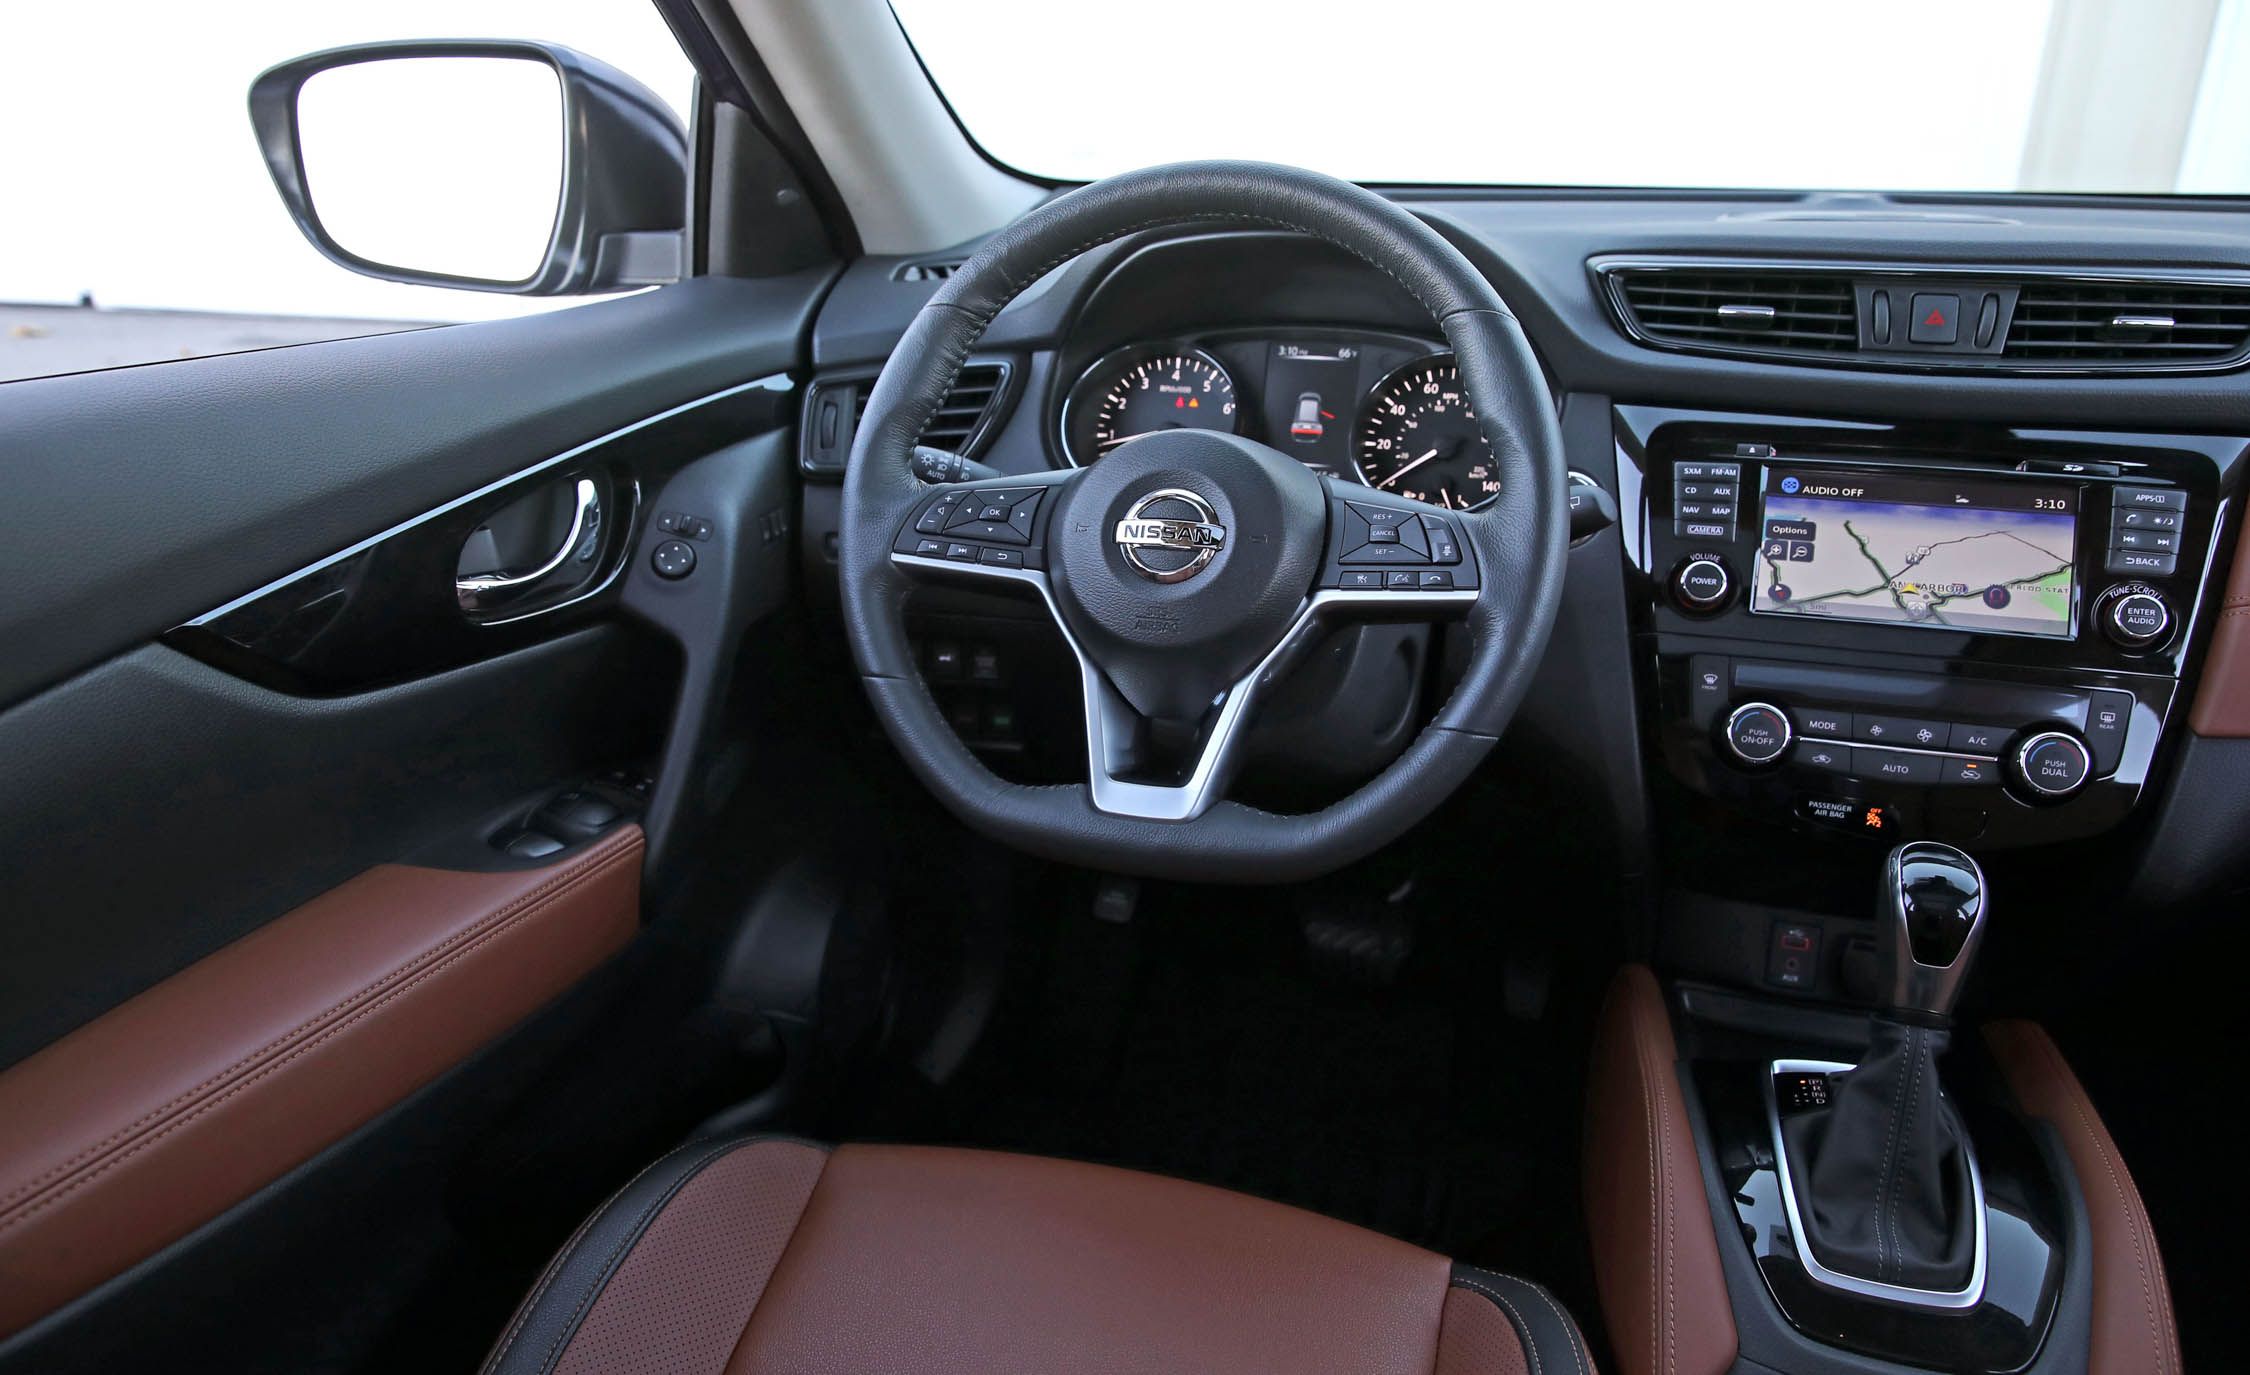 2017 Nissan Rogue Interior View Steering Wheel (View 18 of 37)